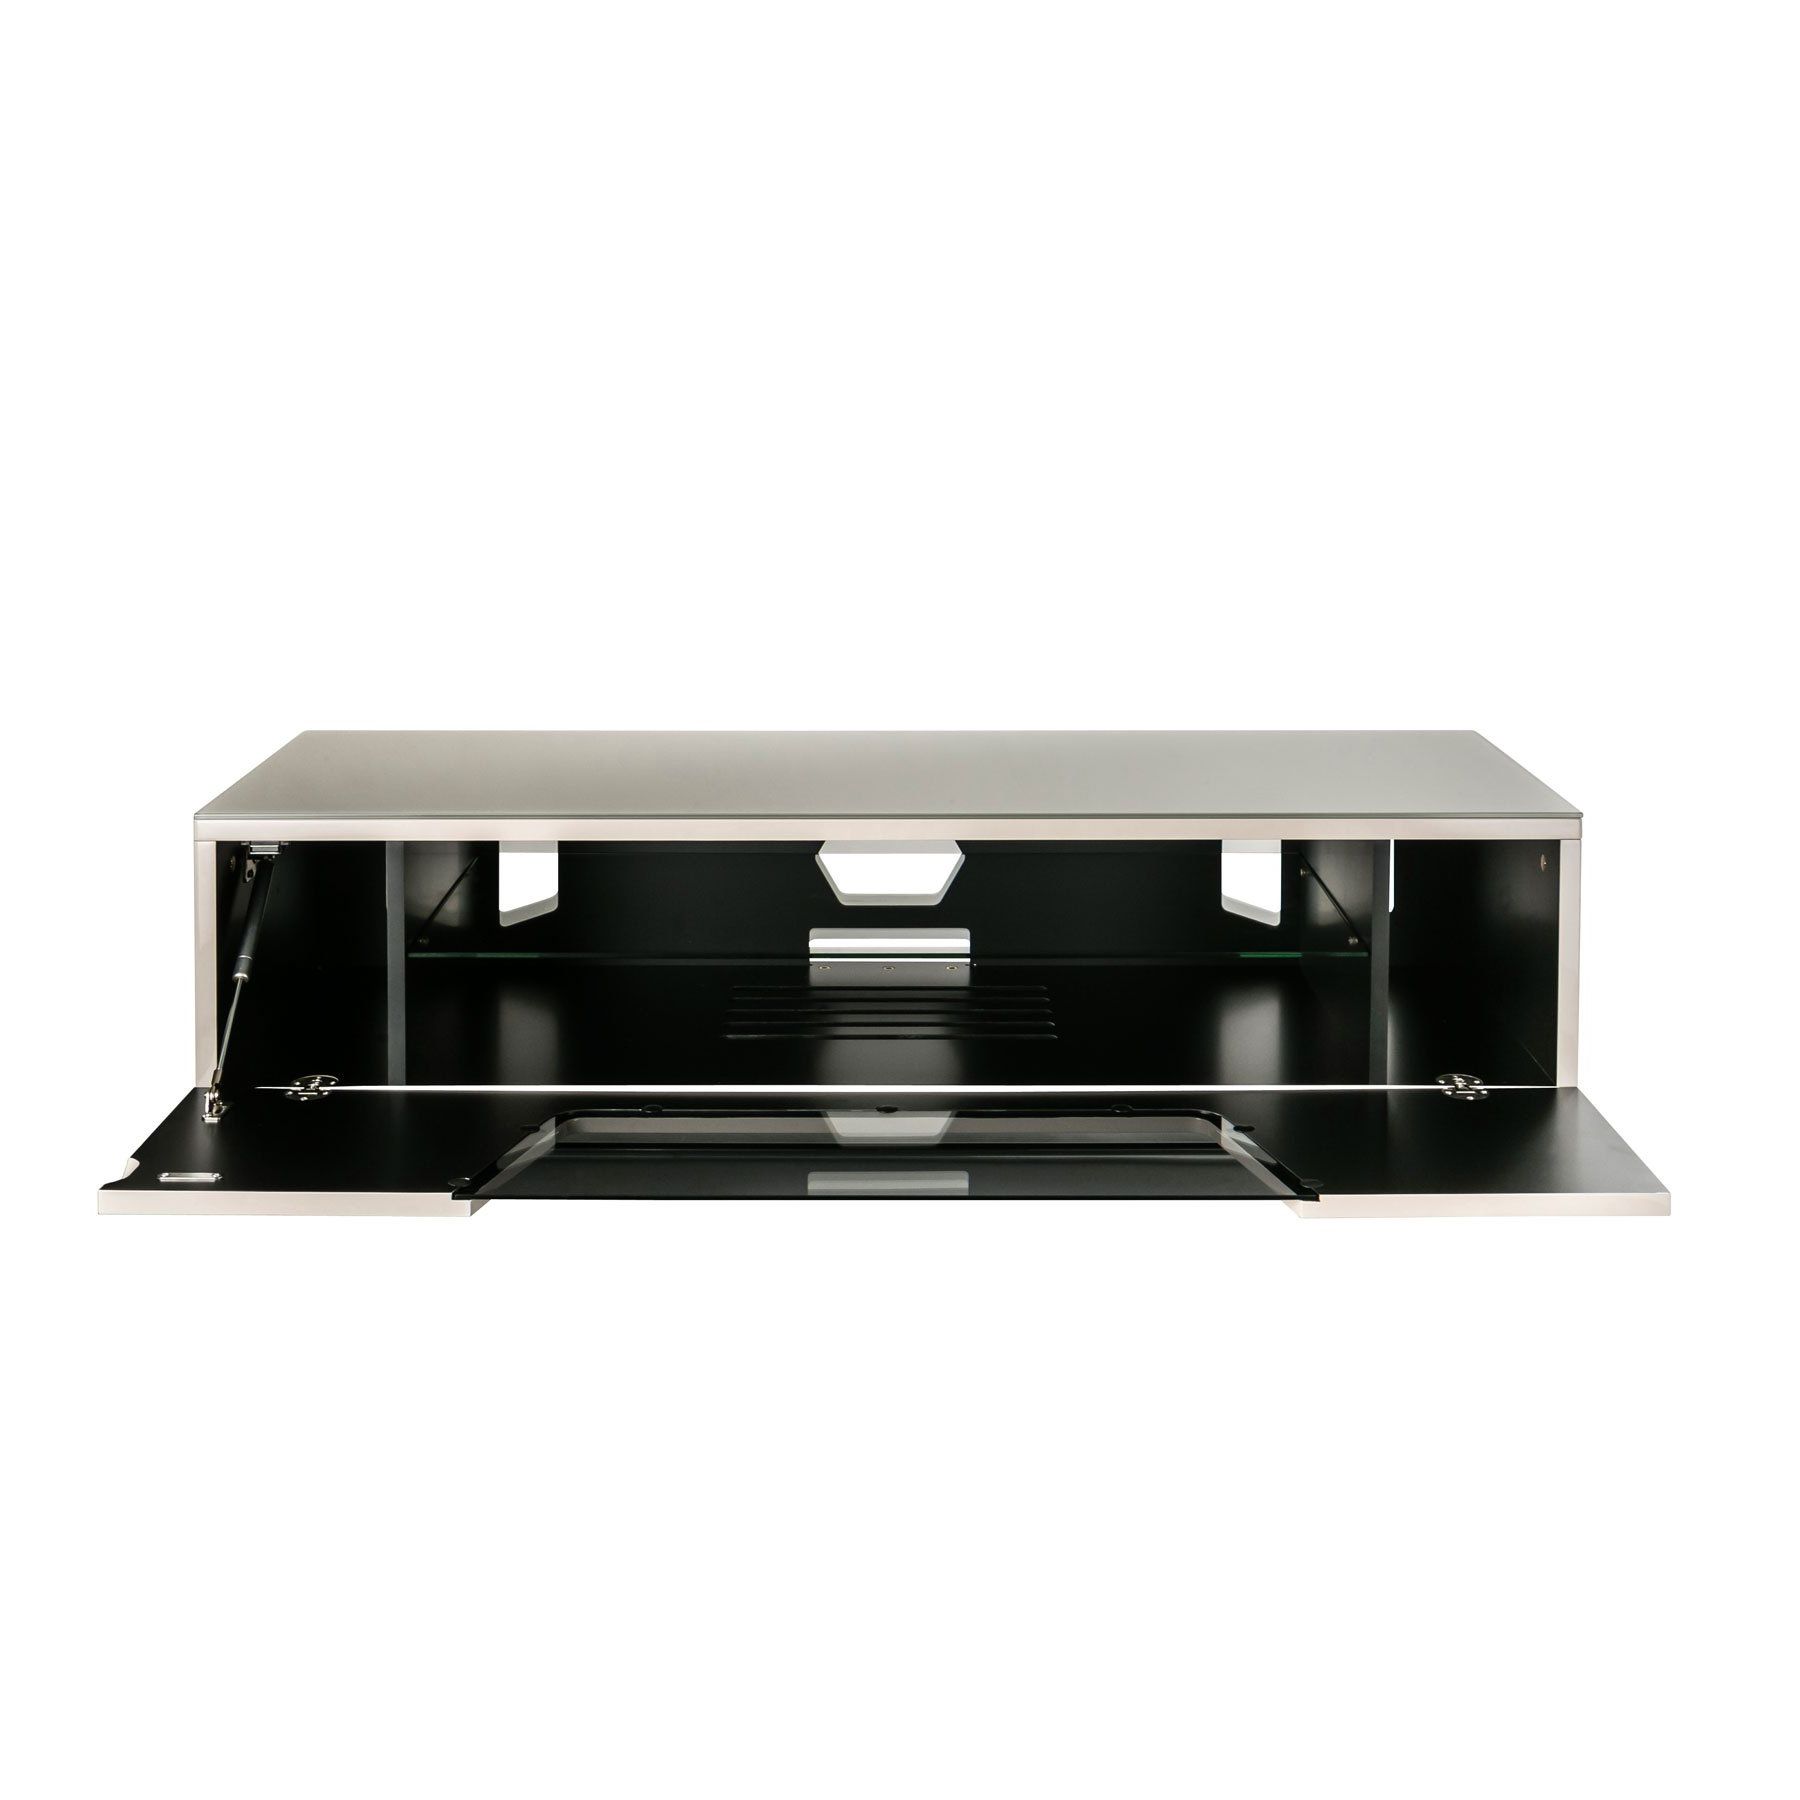 Alphason Chromium 2 120cm Ivory Tv Stand For Up To 60" Tvs Regarding Chromium Tv Stands (Gallery 15 of 20)